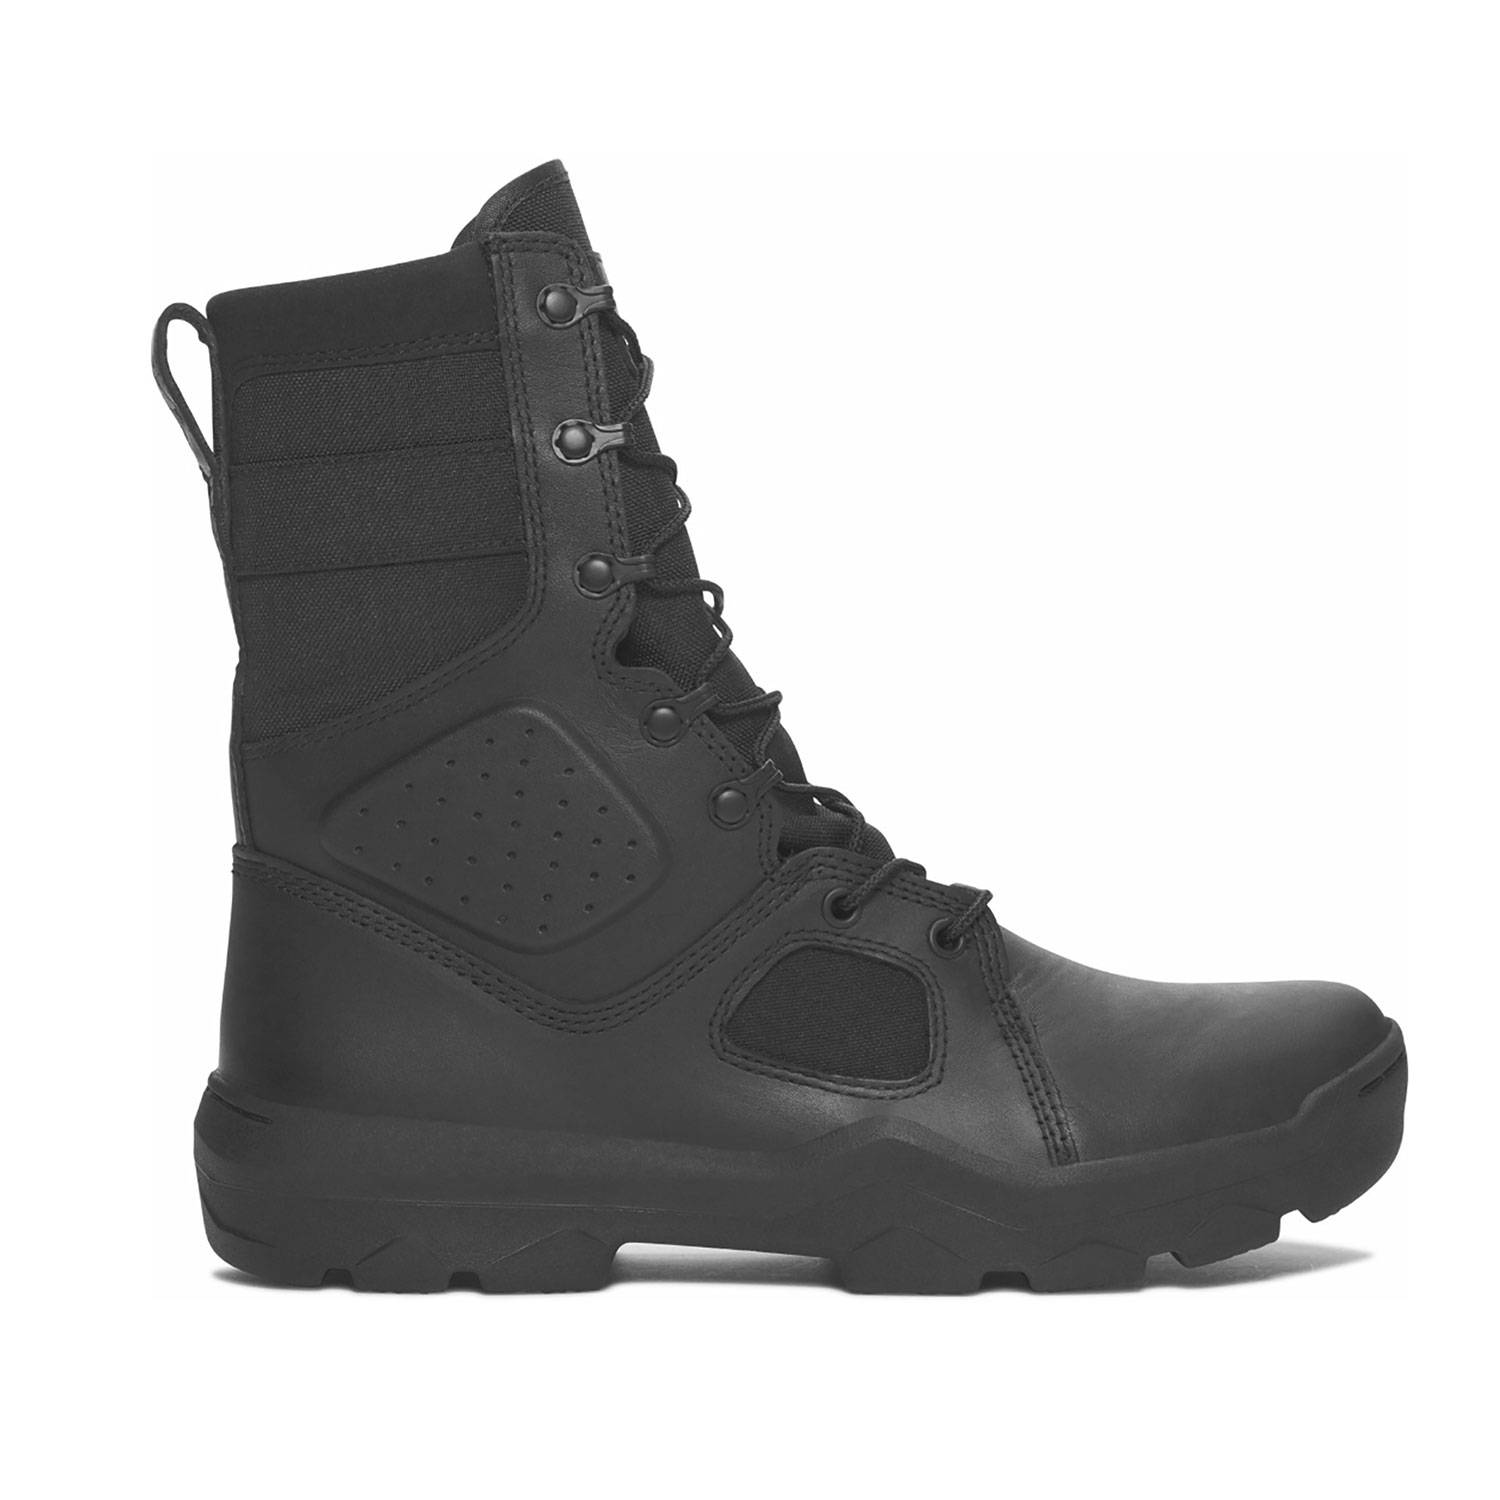 Under Armour FNP Tactical Boot